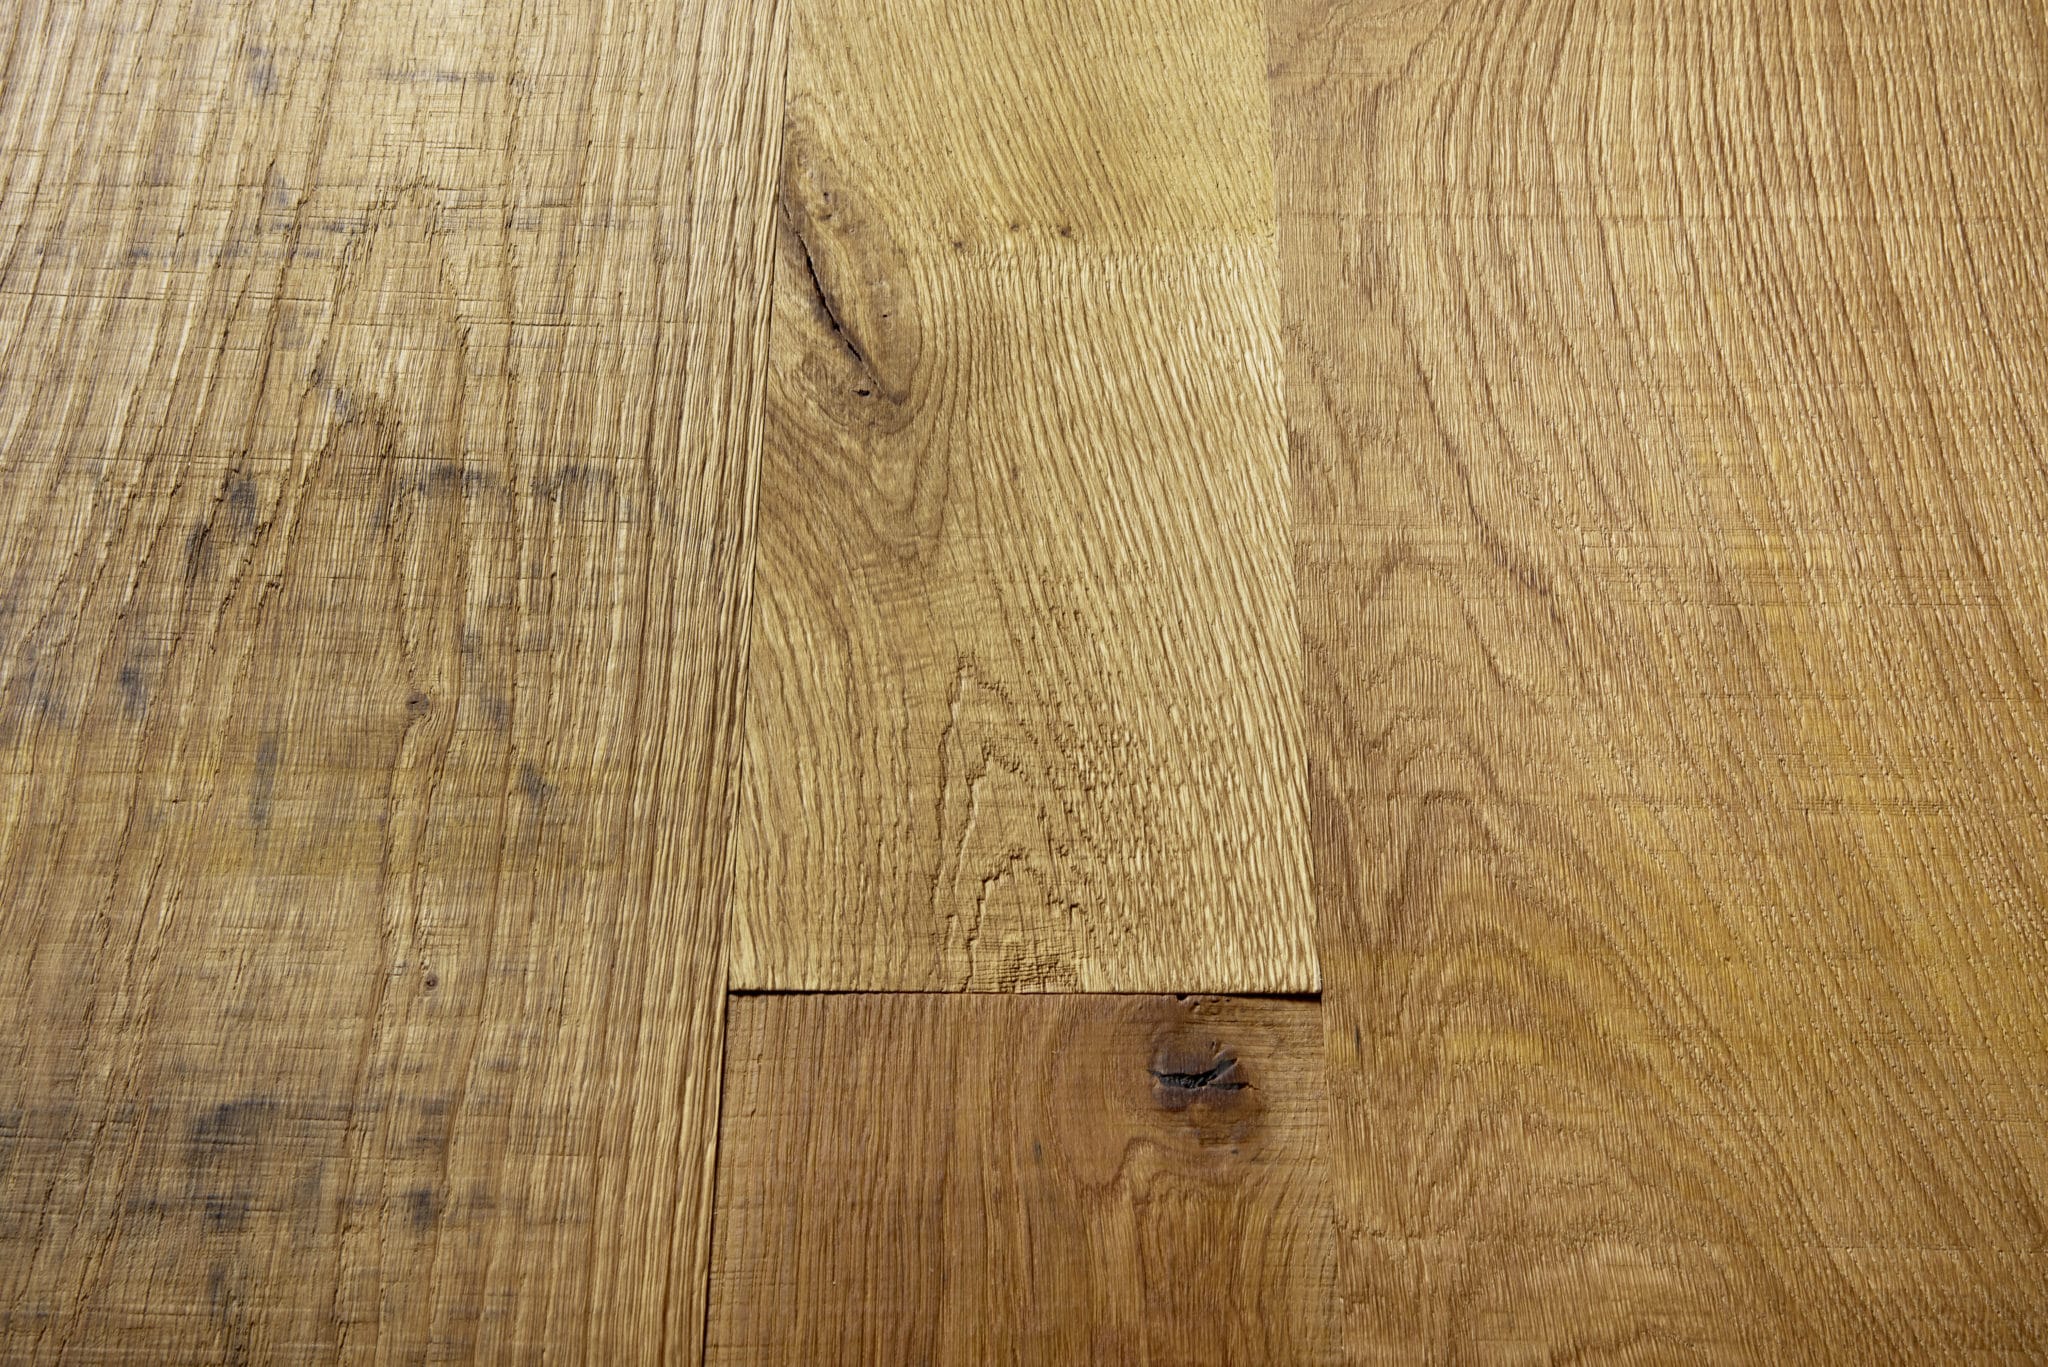 CHALET sapwood black plugging knots Natura oil colourless